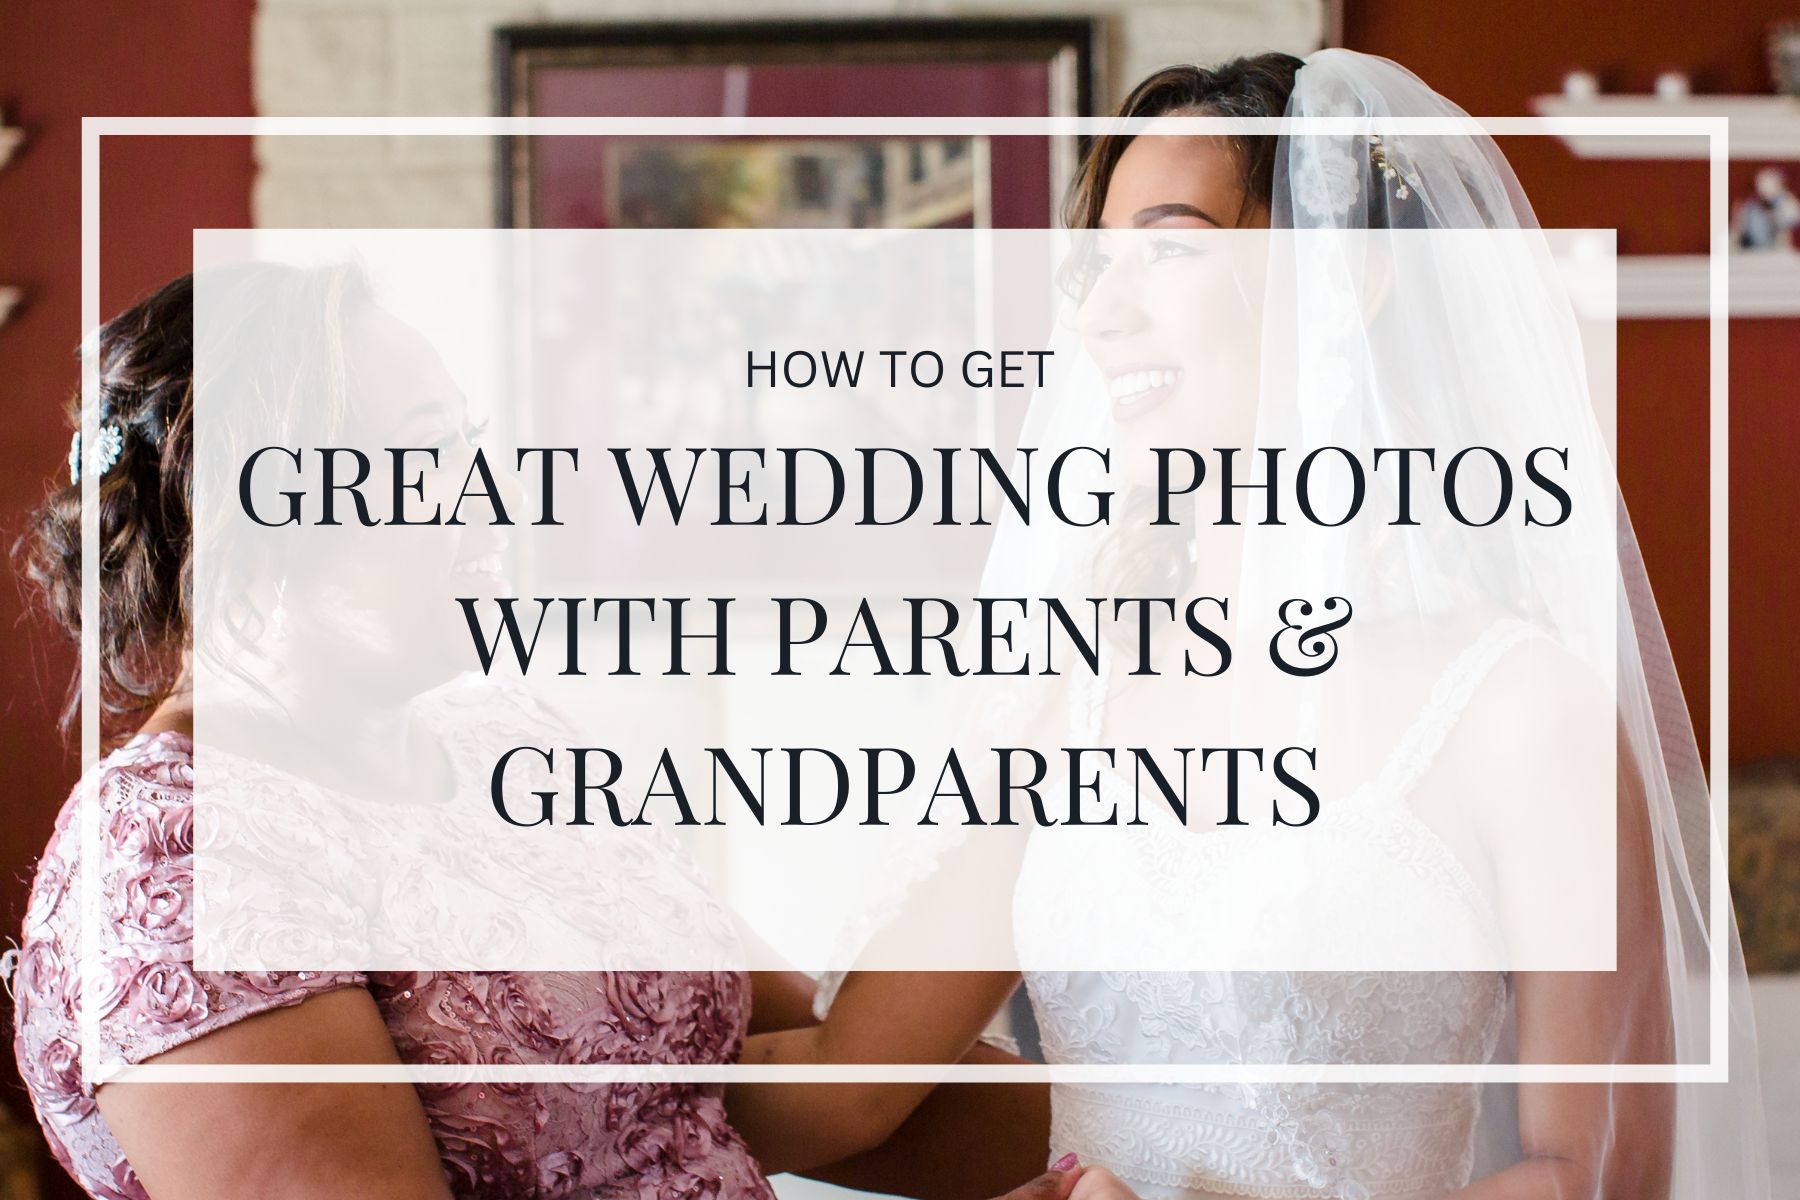 Wedding photos with parents and grandparents title image